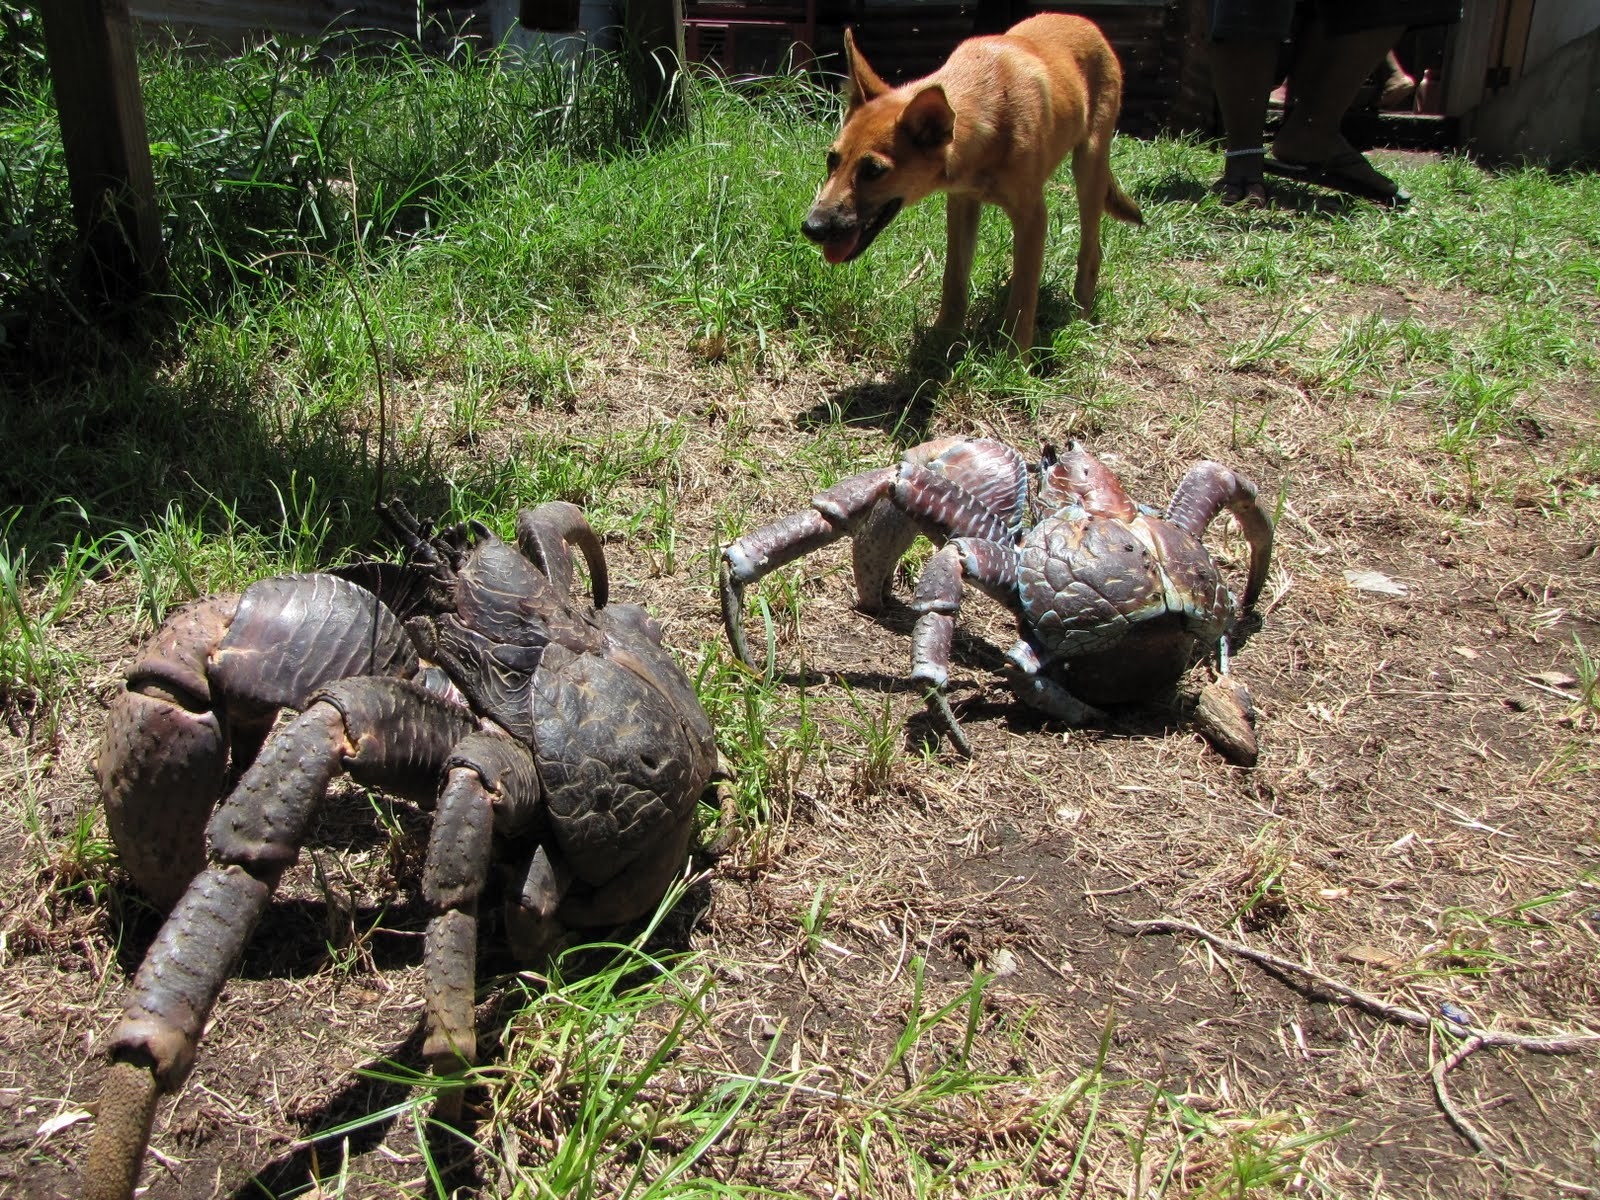 A dog next to coconut crabs